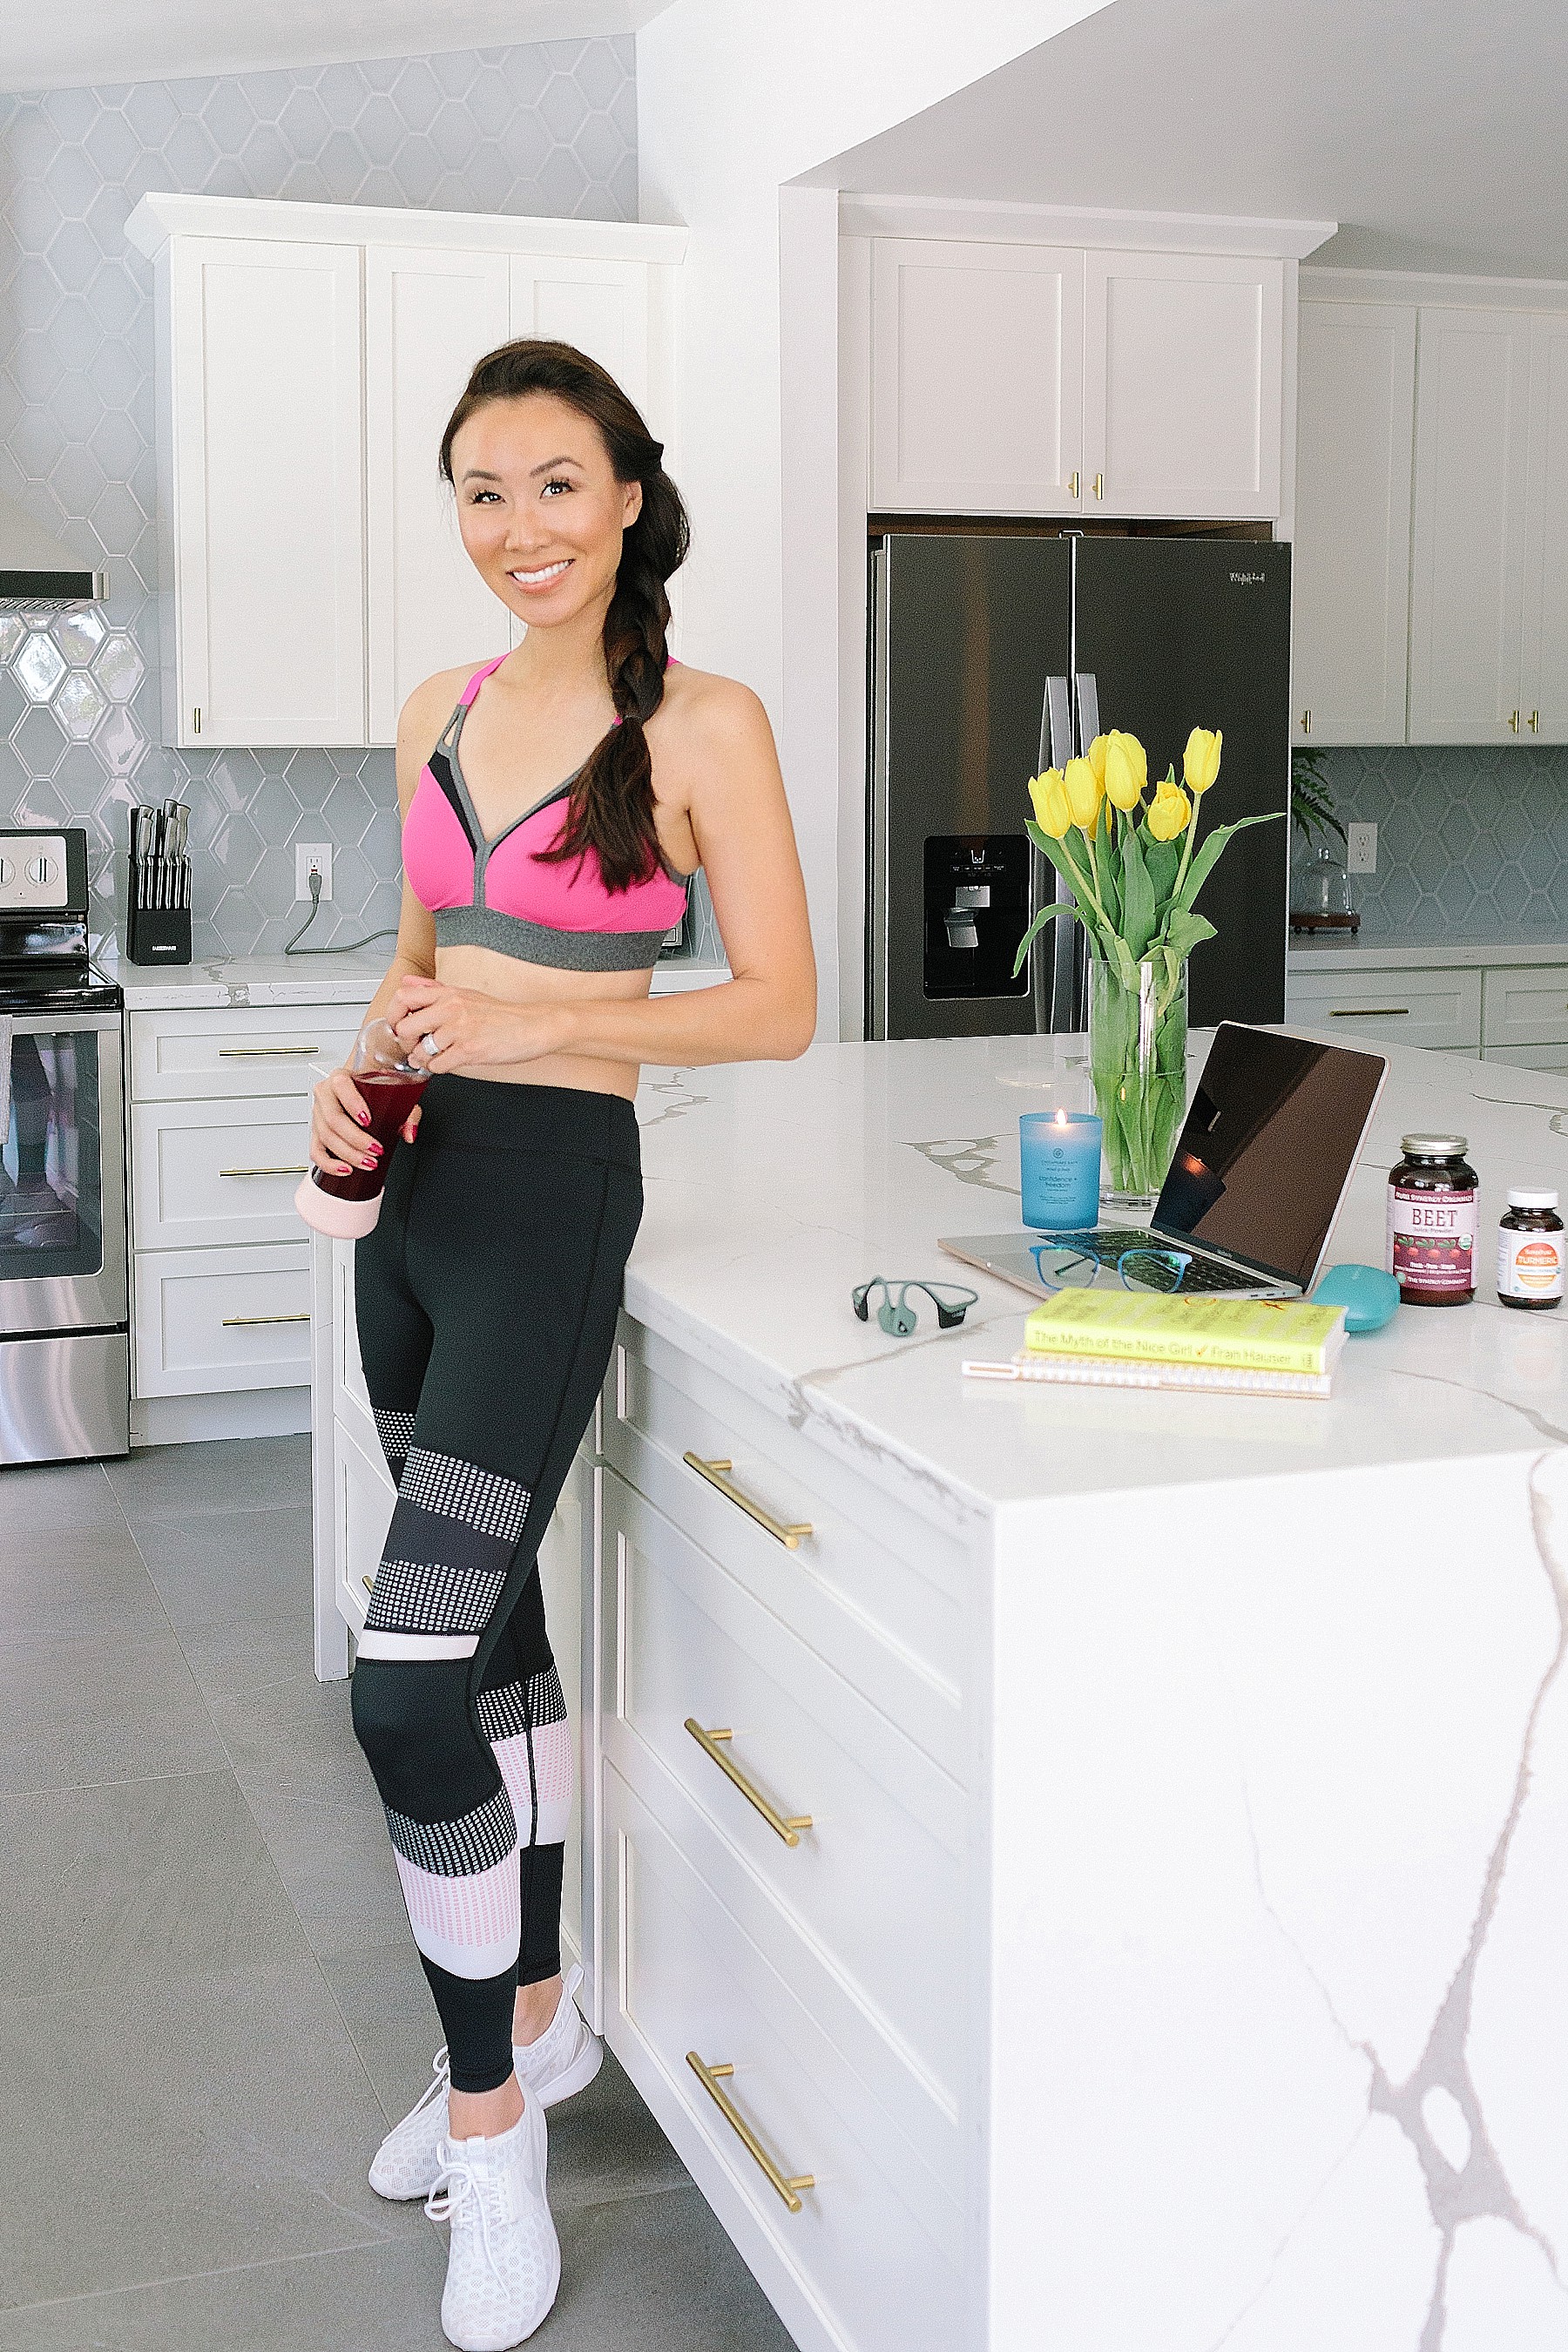 Women's wellness product reviews with lifestyle blogger Diana Elizabeth - post workout standing in kitchen with water bottle